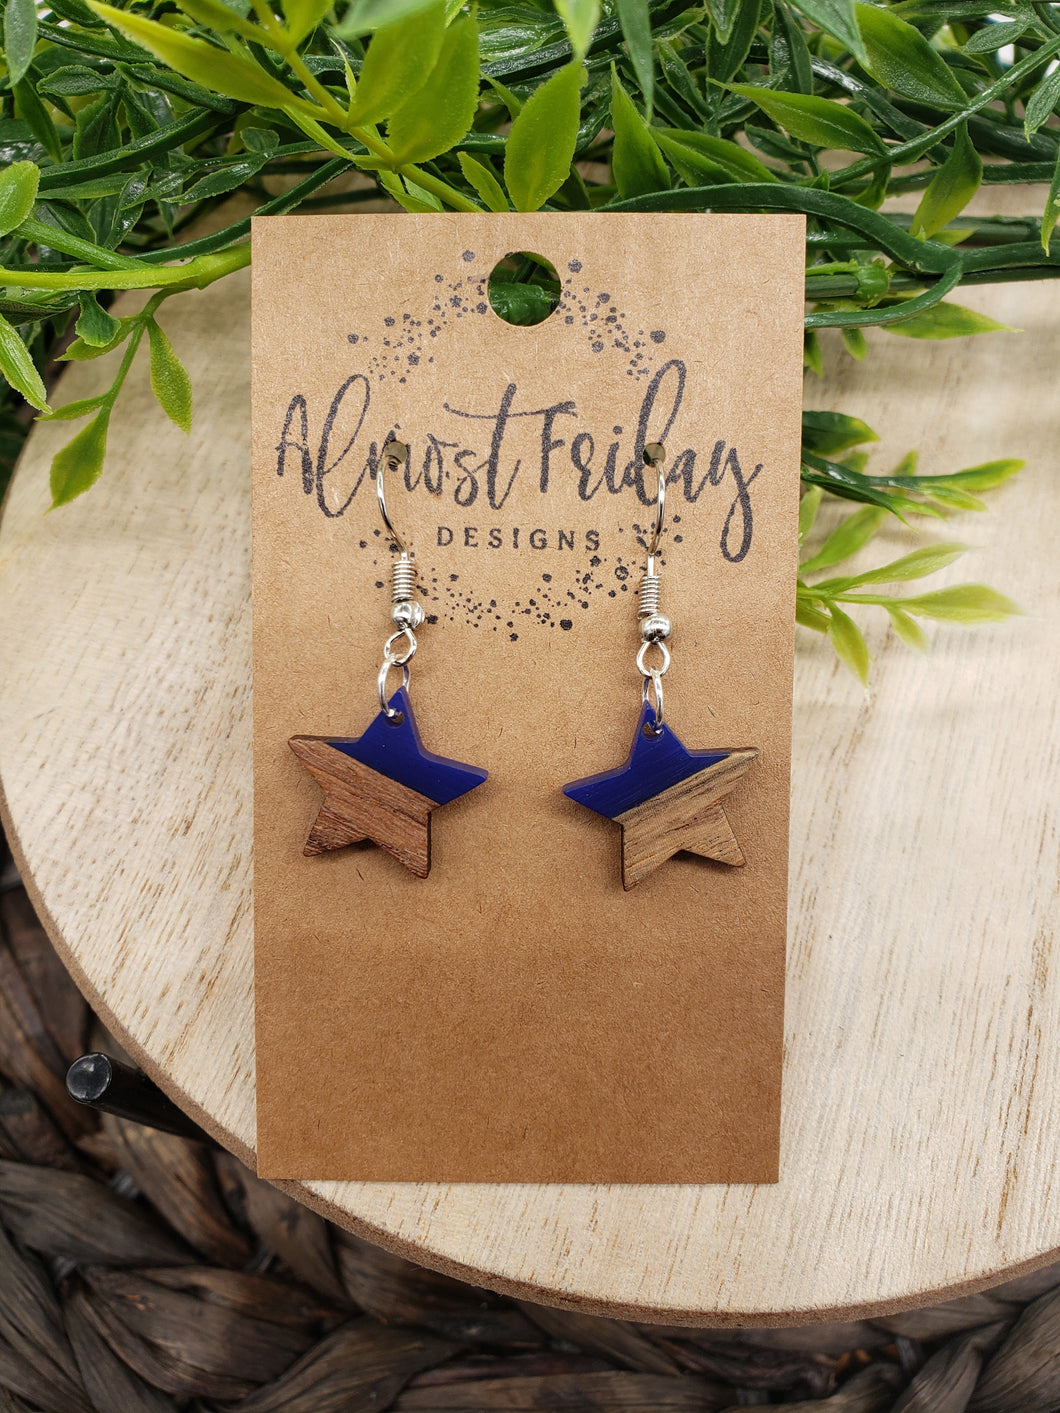 Wood Earrings - Star - 4th of July - Independence Day - USA - Olympics - Blue - Statement Earrings - Mini Star - Wood and Resin